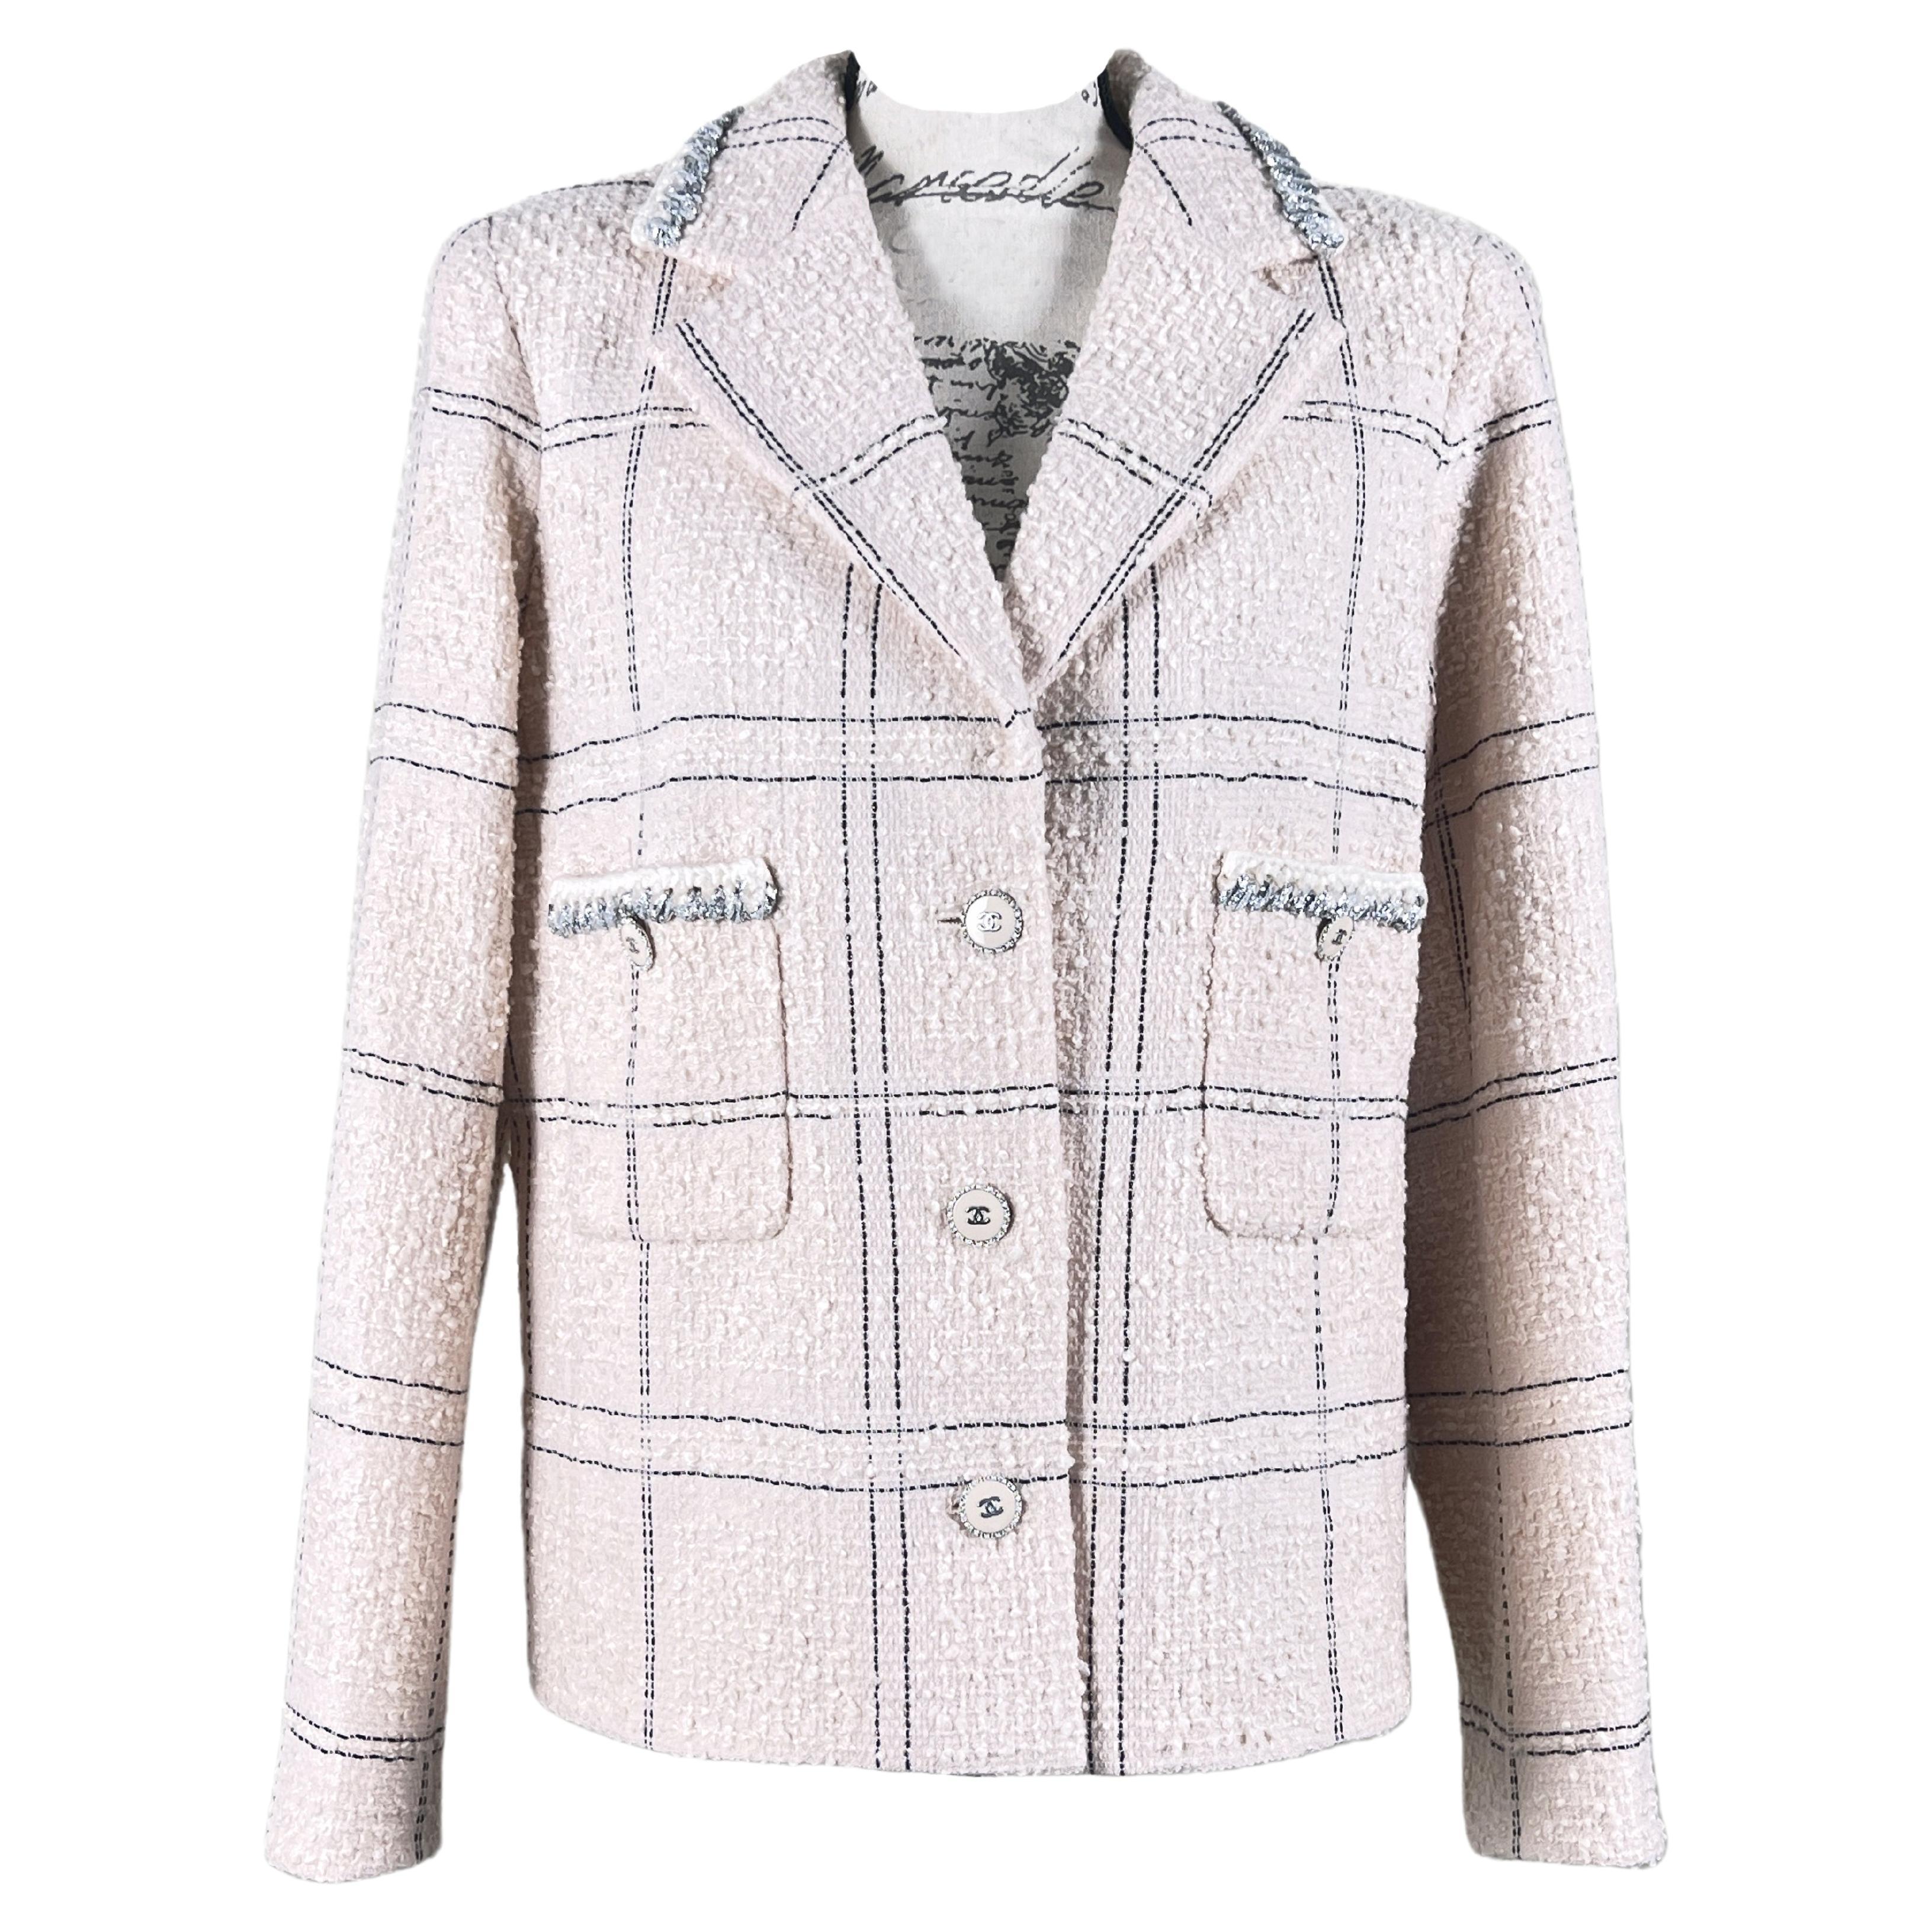 Chanel 2021 Ad Campaign Tweed Jacket For Sale